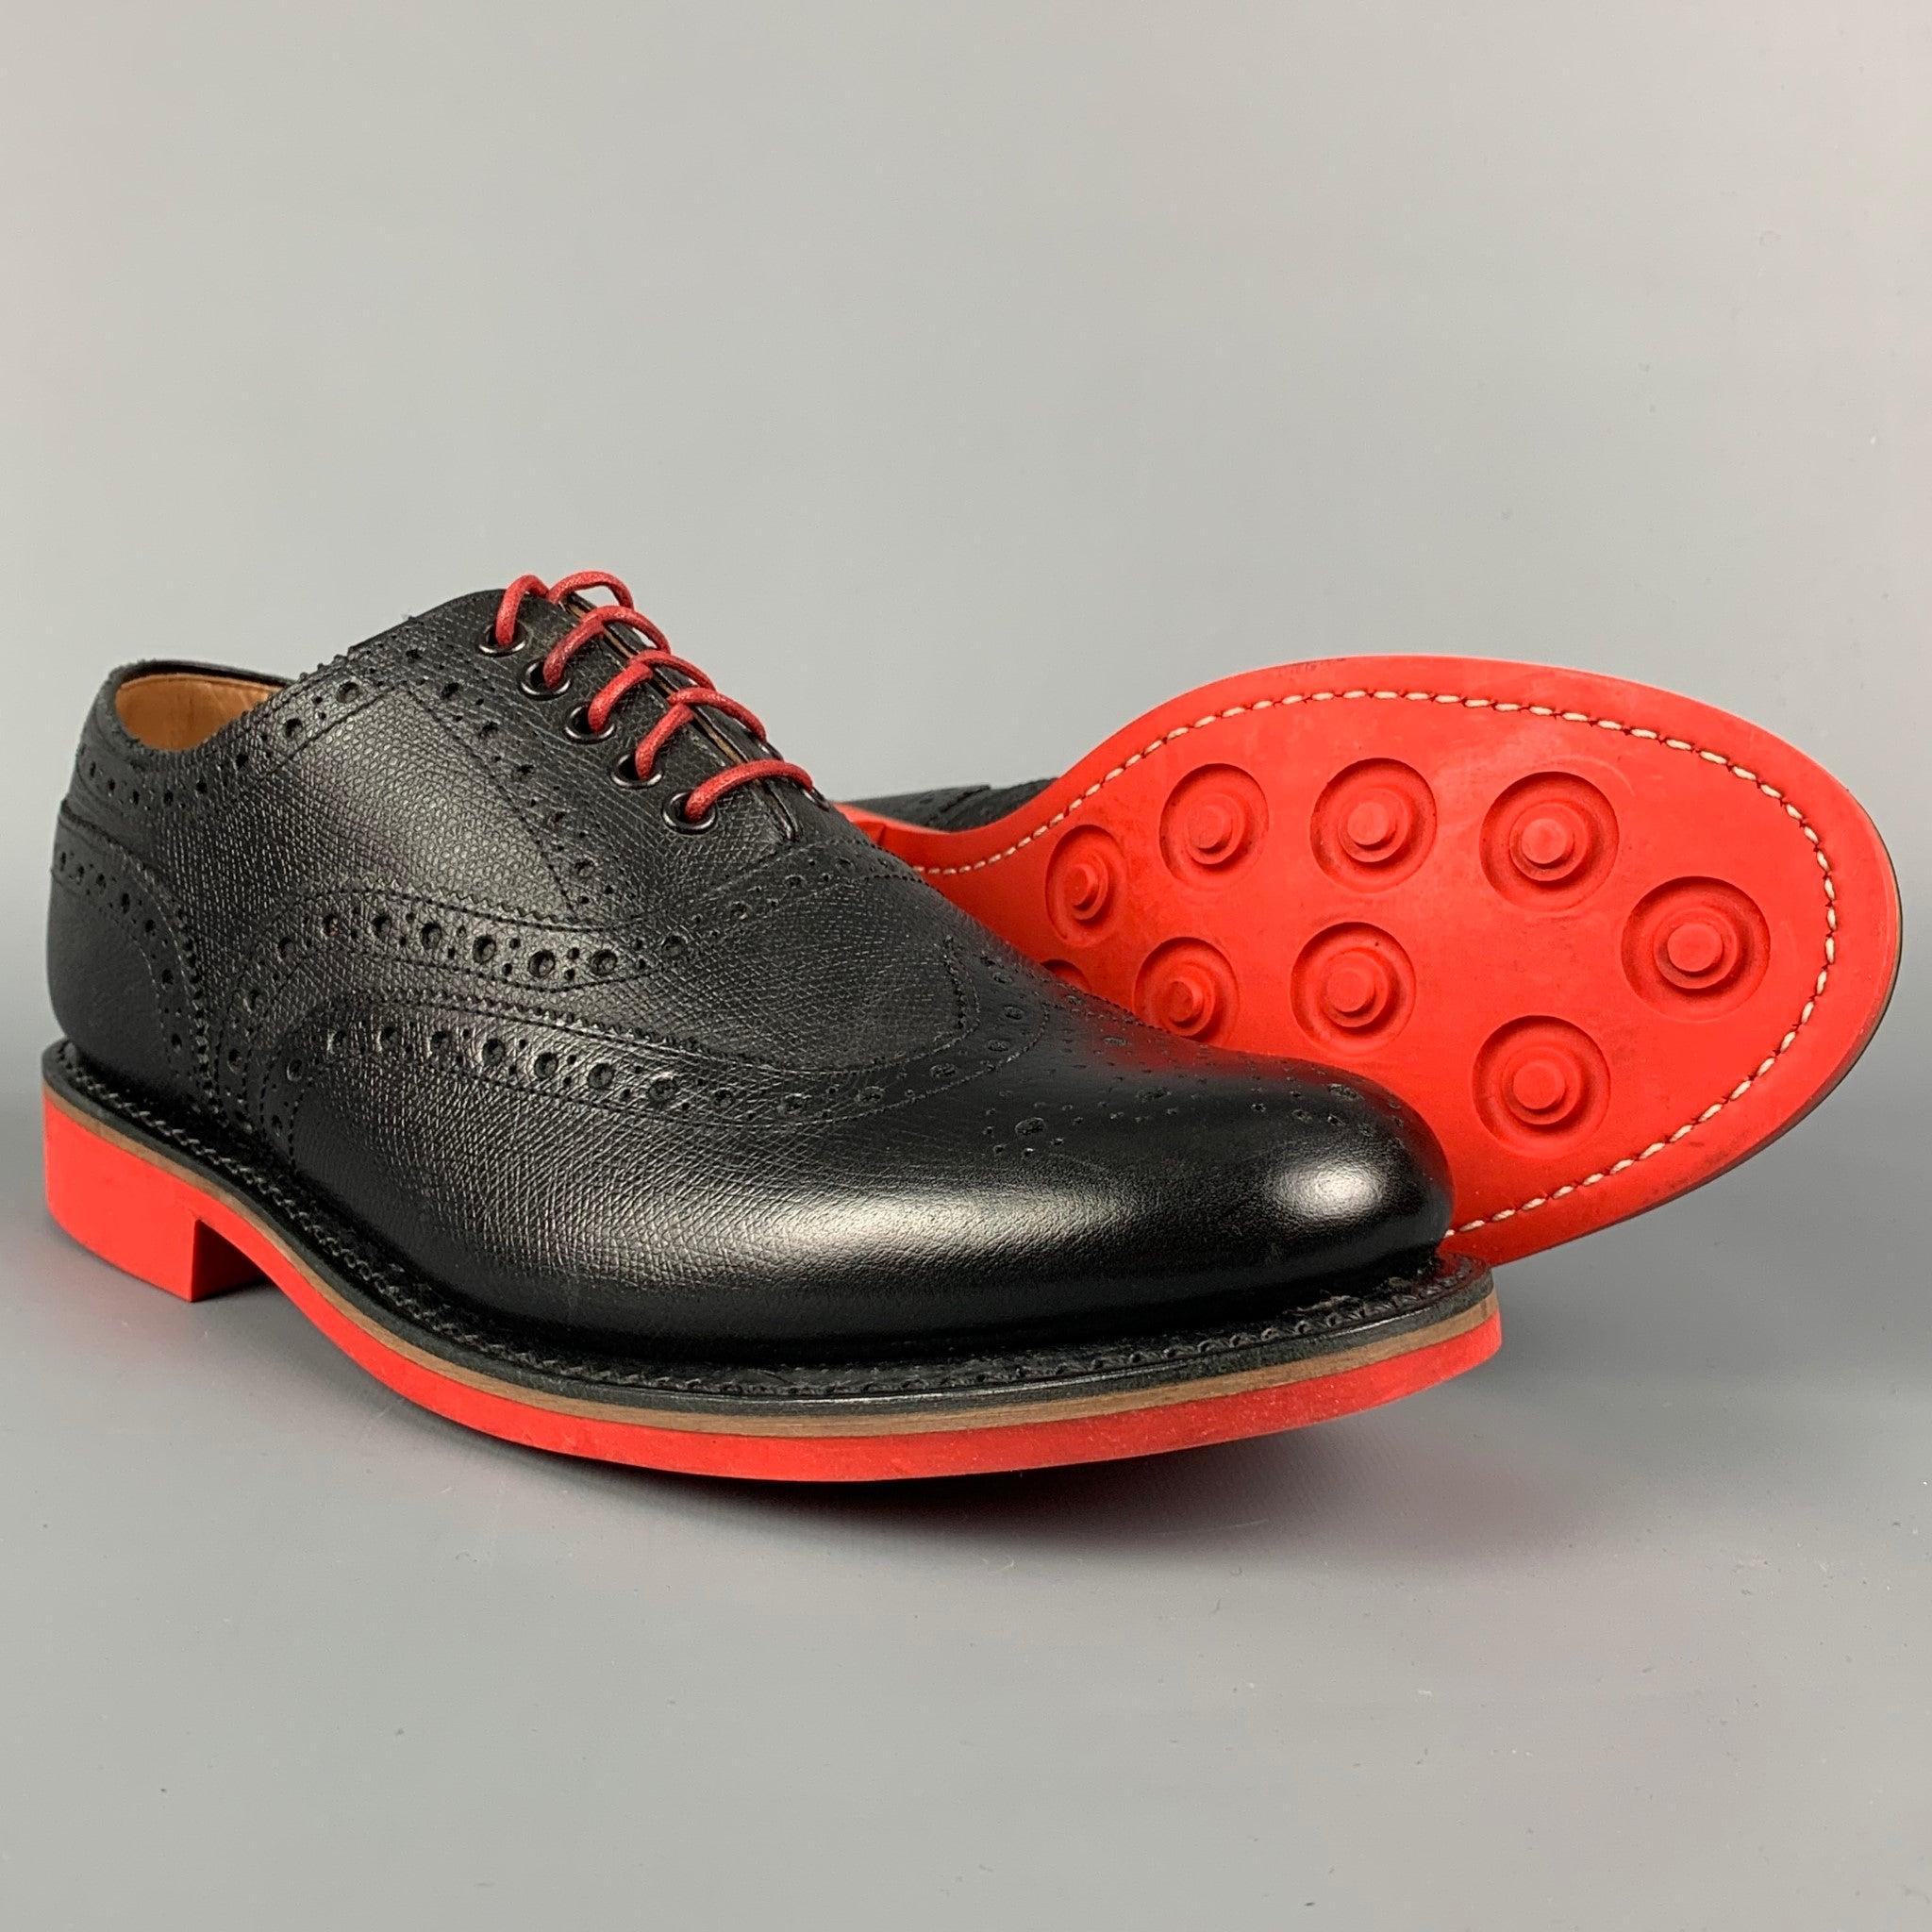 GRENSON Size 8.5 Black & Red Perforated Leather Wingtip Lace Up Shoes In Good Condition For Sale In San Francisco, CA